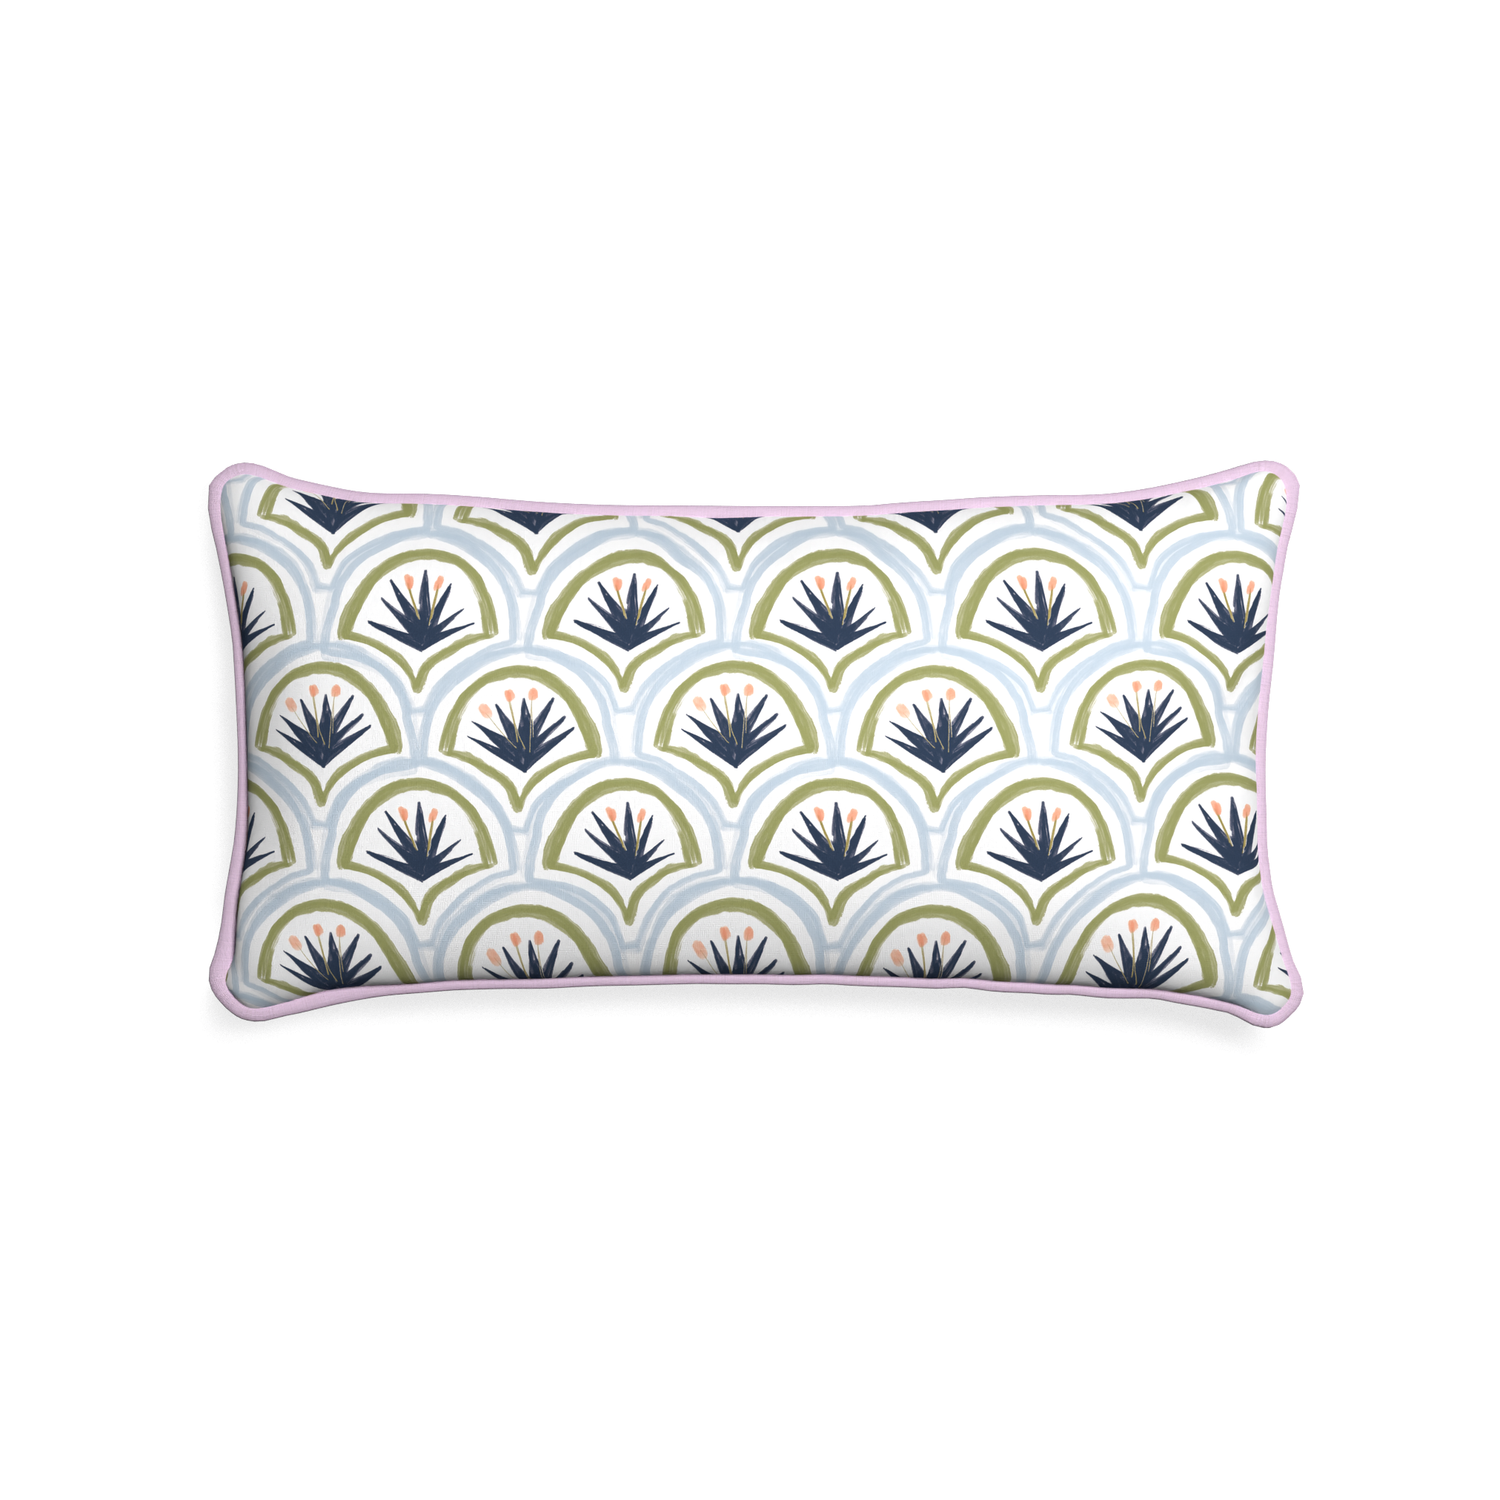 Midi-lumbar thatcher midnight custom art deco palm patternpillow with l piping on white background